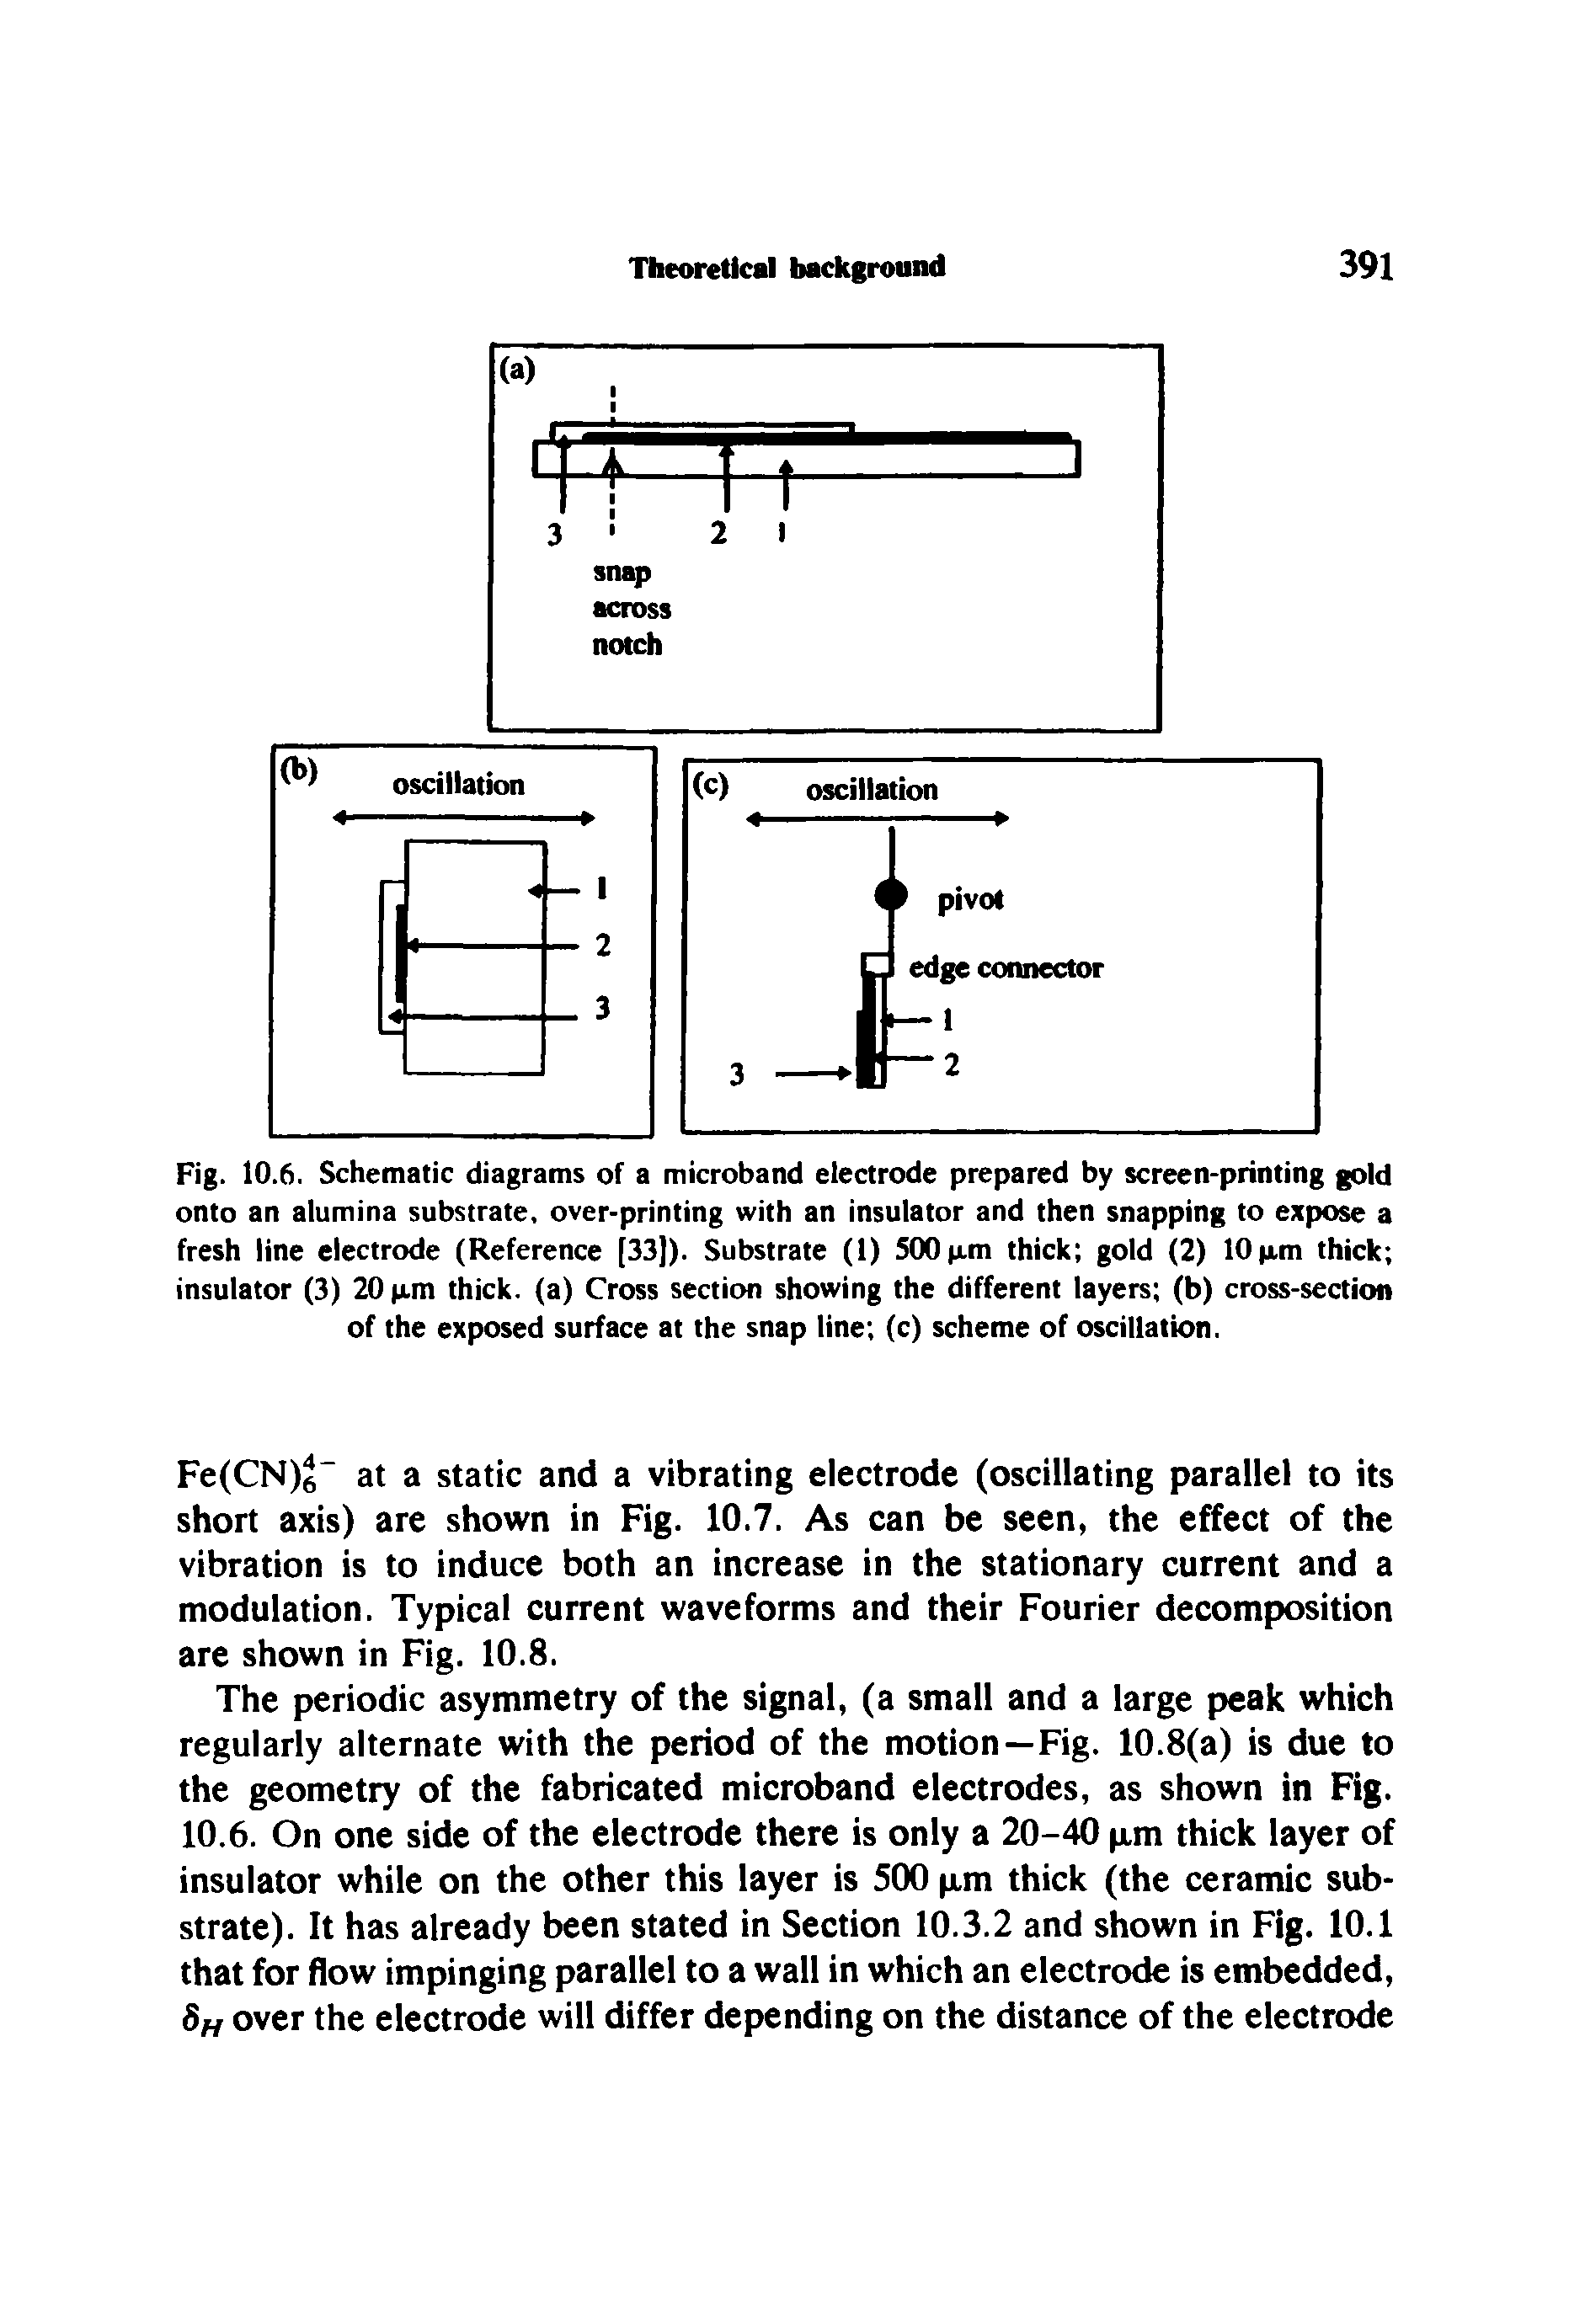 Fig. 10.6. Schematic diagrams of a microband electrode prepared by screen-printing gold onto an alumina substrate, over-printing with an insulator and then snapping to expose a fresh line electrode (Reference [33]). Substrate (1) 500 p.m thick gold (2) 10 im thick insulator (3) 20 p.m thick, (a) Cross section showing the different layers (b) cross-section of the exposed surface at the snap line (c) scheme of oscillation.